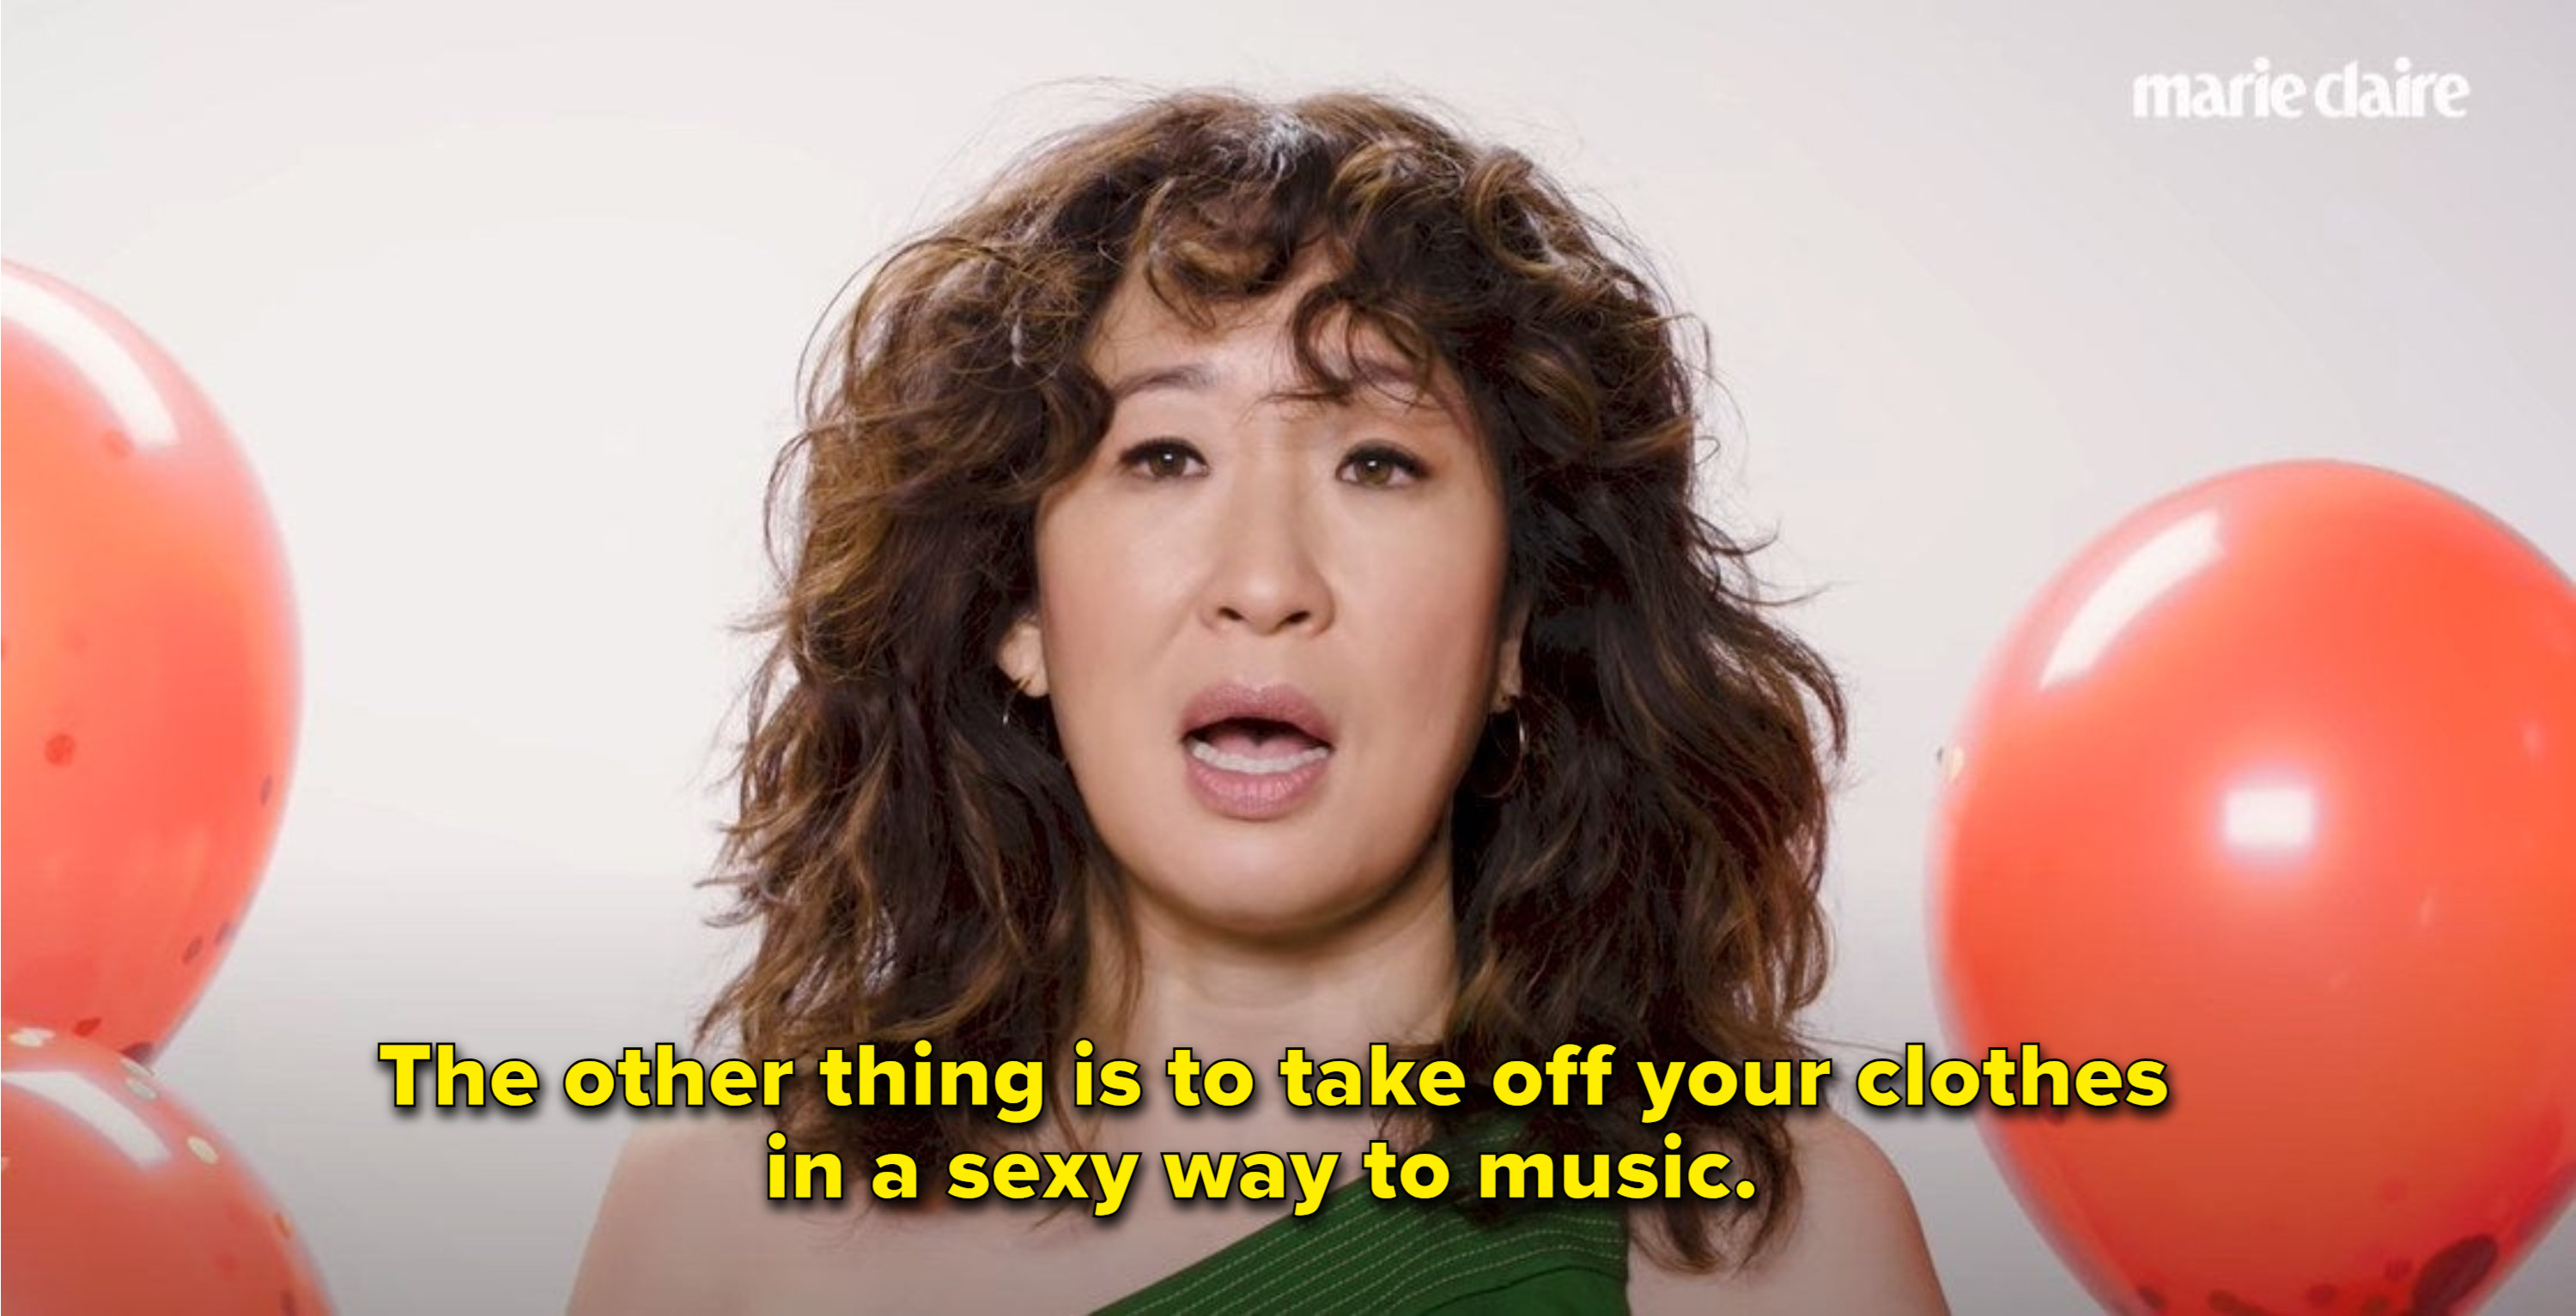 Sandra Oh says &quot;The other thing is to take off your clothes in a sexy way to music&quot;